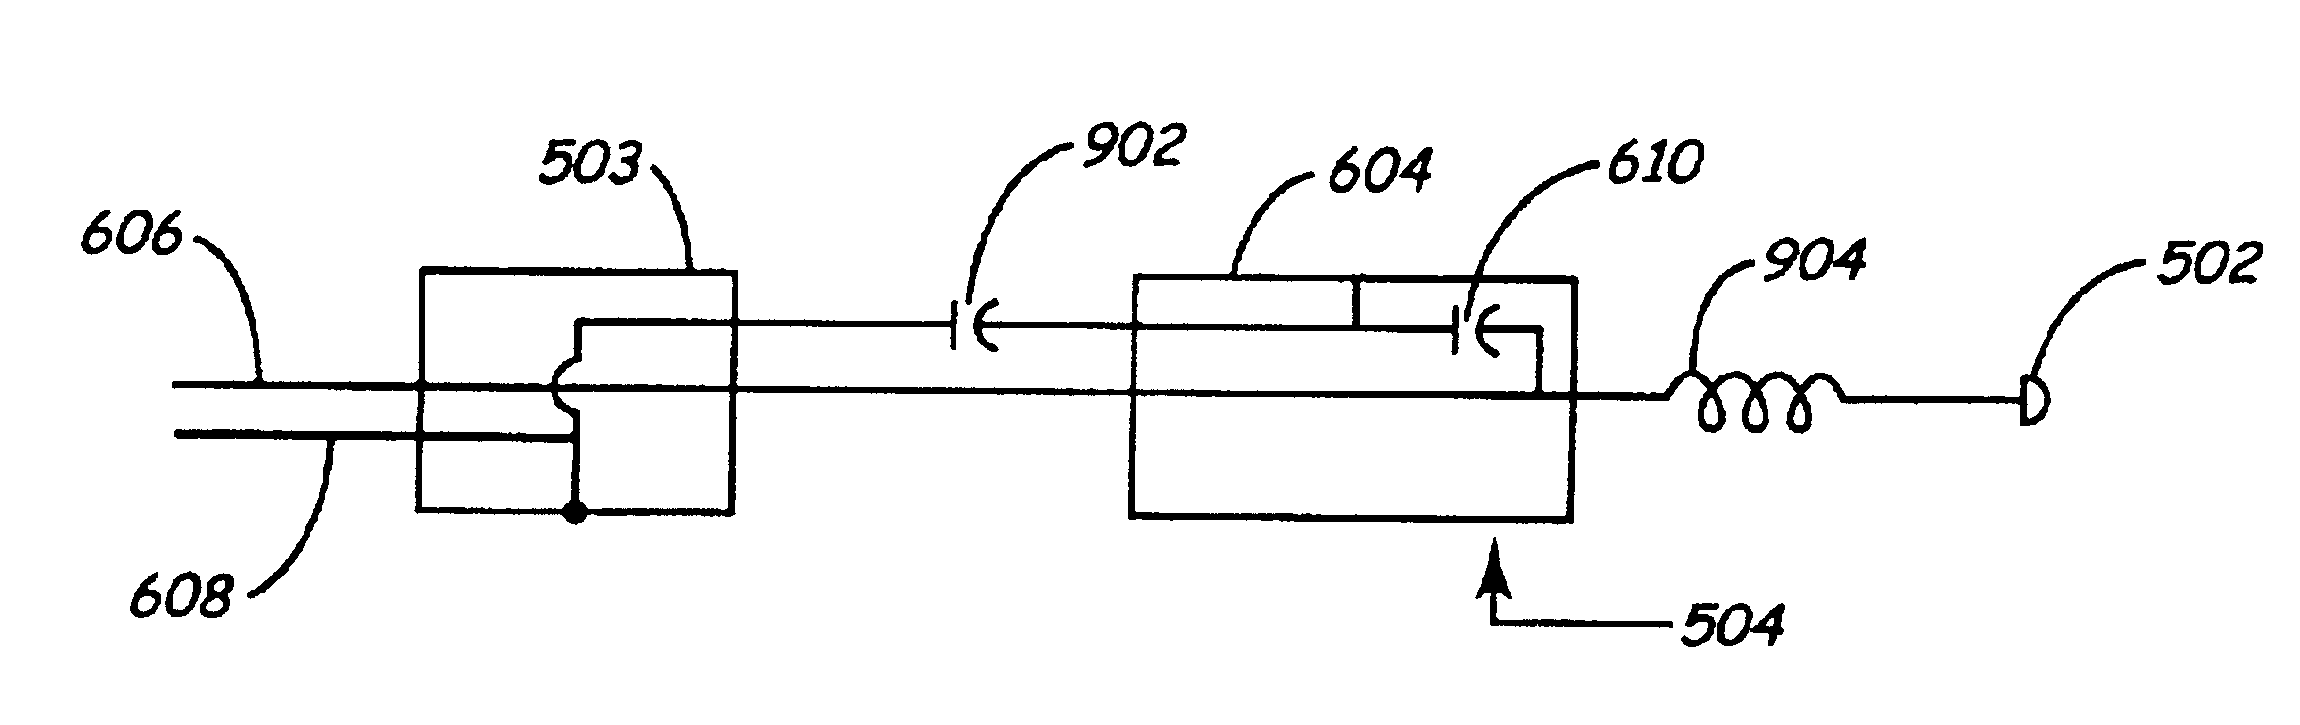 Method and apparatus for shunting induced currents in an electrical lead